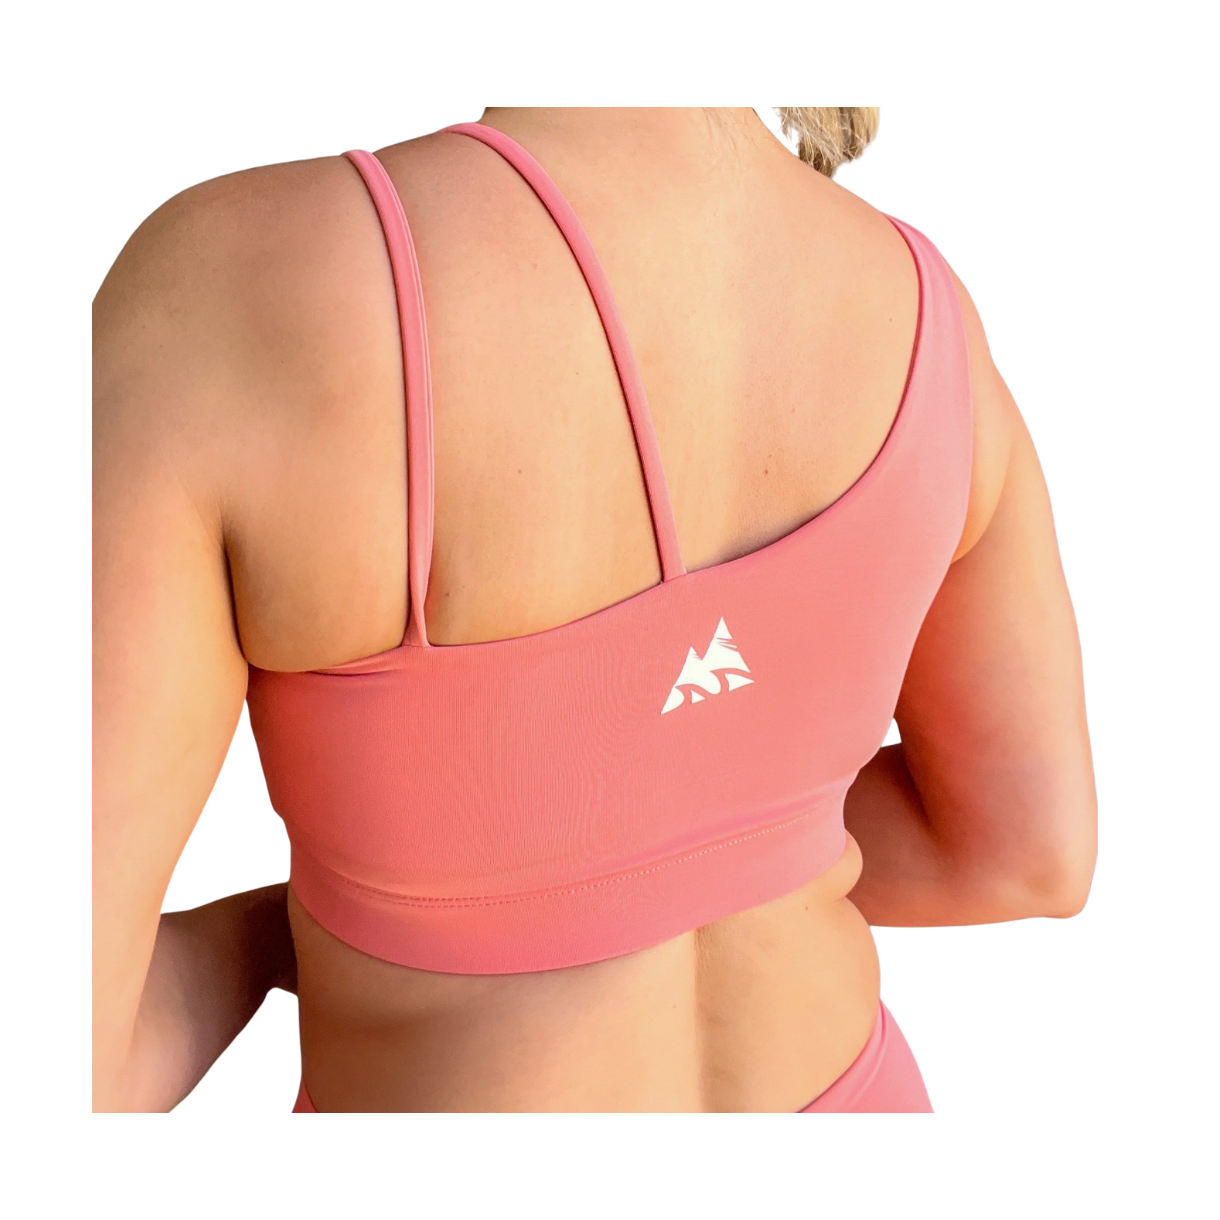 Coral asymmetrical sports bra with one thick strap and two thinner straps